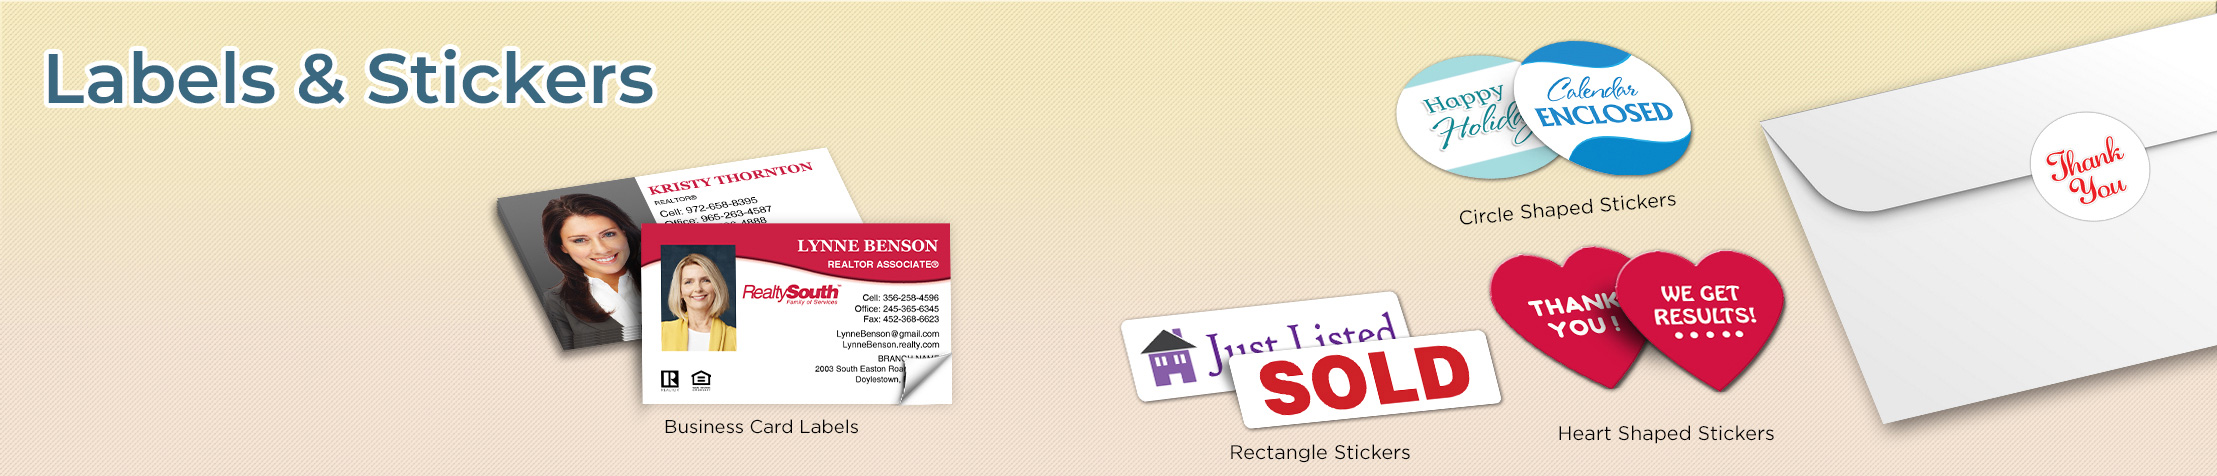 Realty South Real Estate Labels and Stickers - Realty South  business card labels, return address labels, shipping labels, and assorted stickers | BestPrintBuy.com